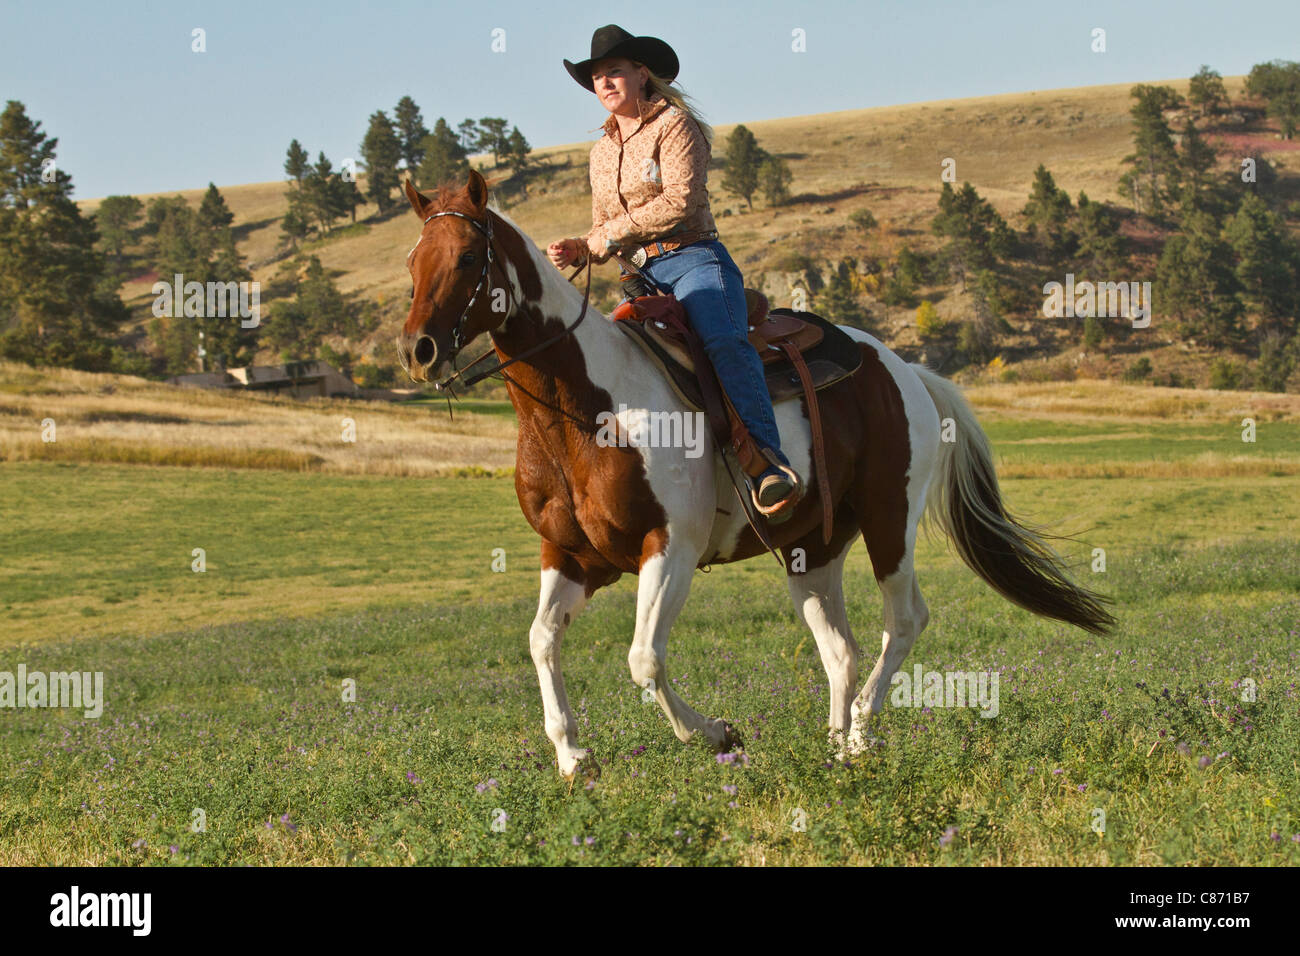 Cowgirl on a horse racing across an open meadow at sunset. Stock Photo